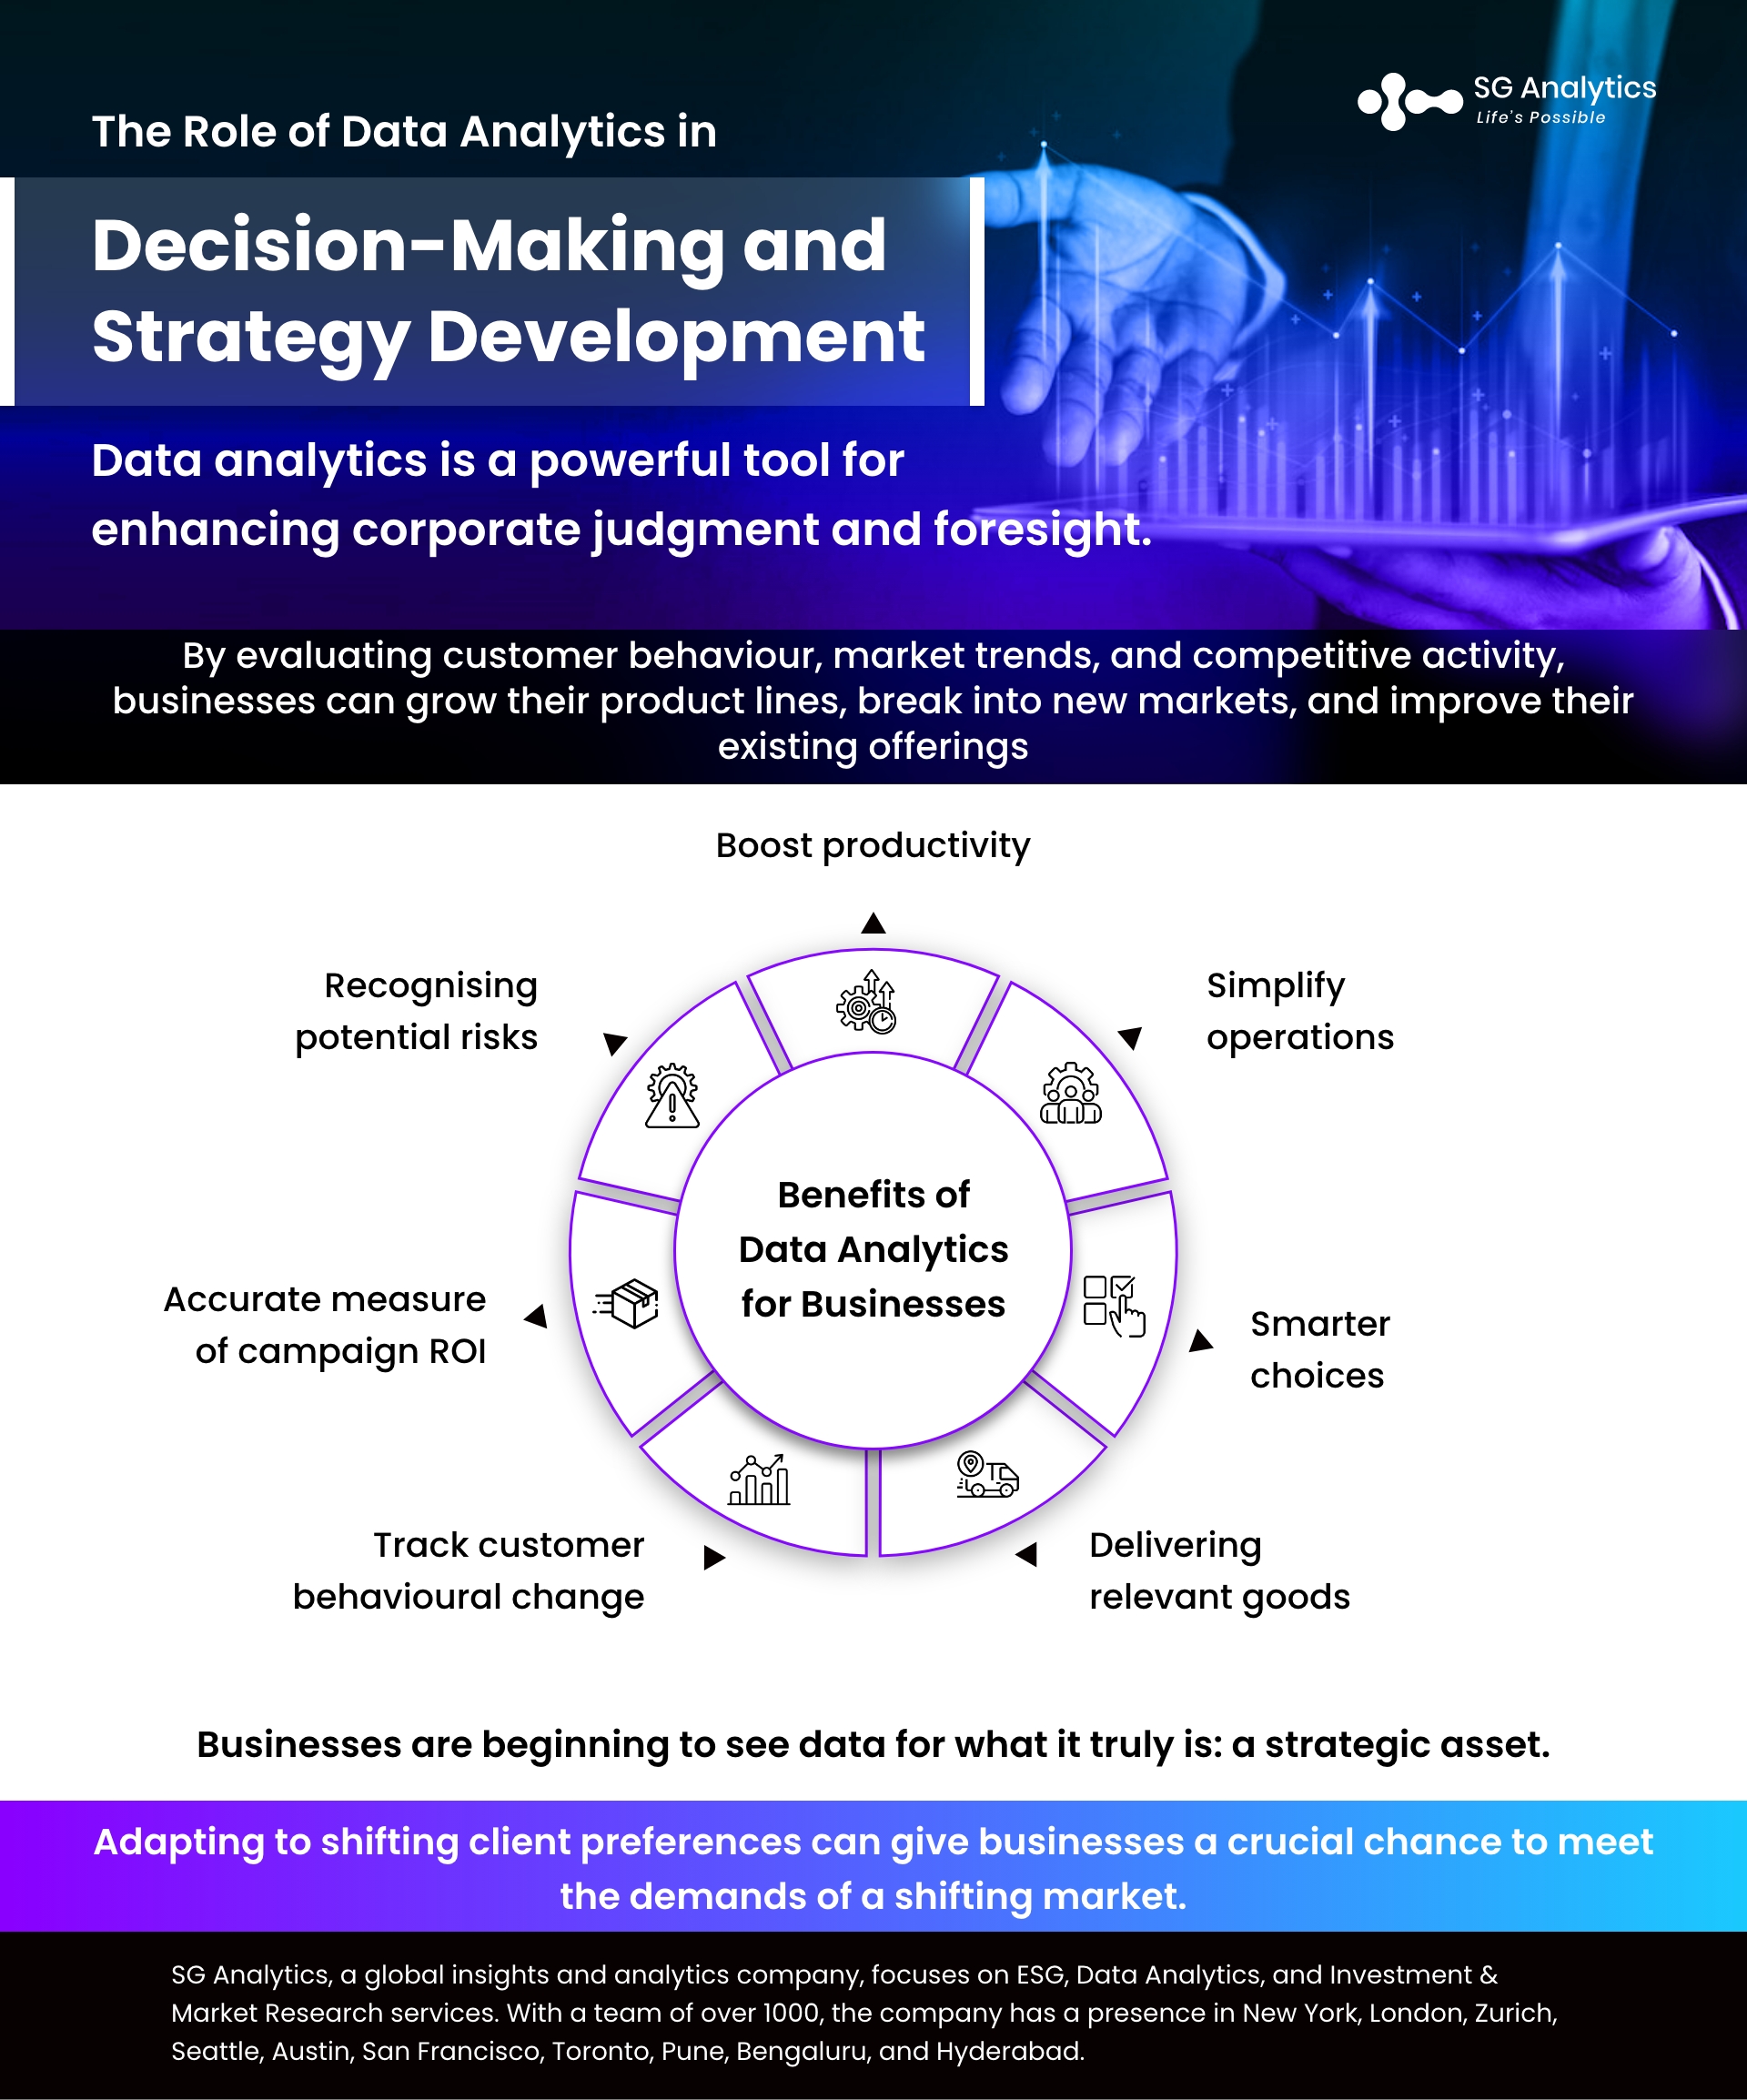 The Role of Data Analytics in Decision-Making and Strategy Development